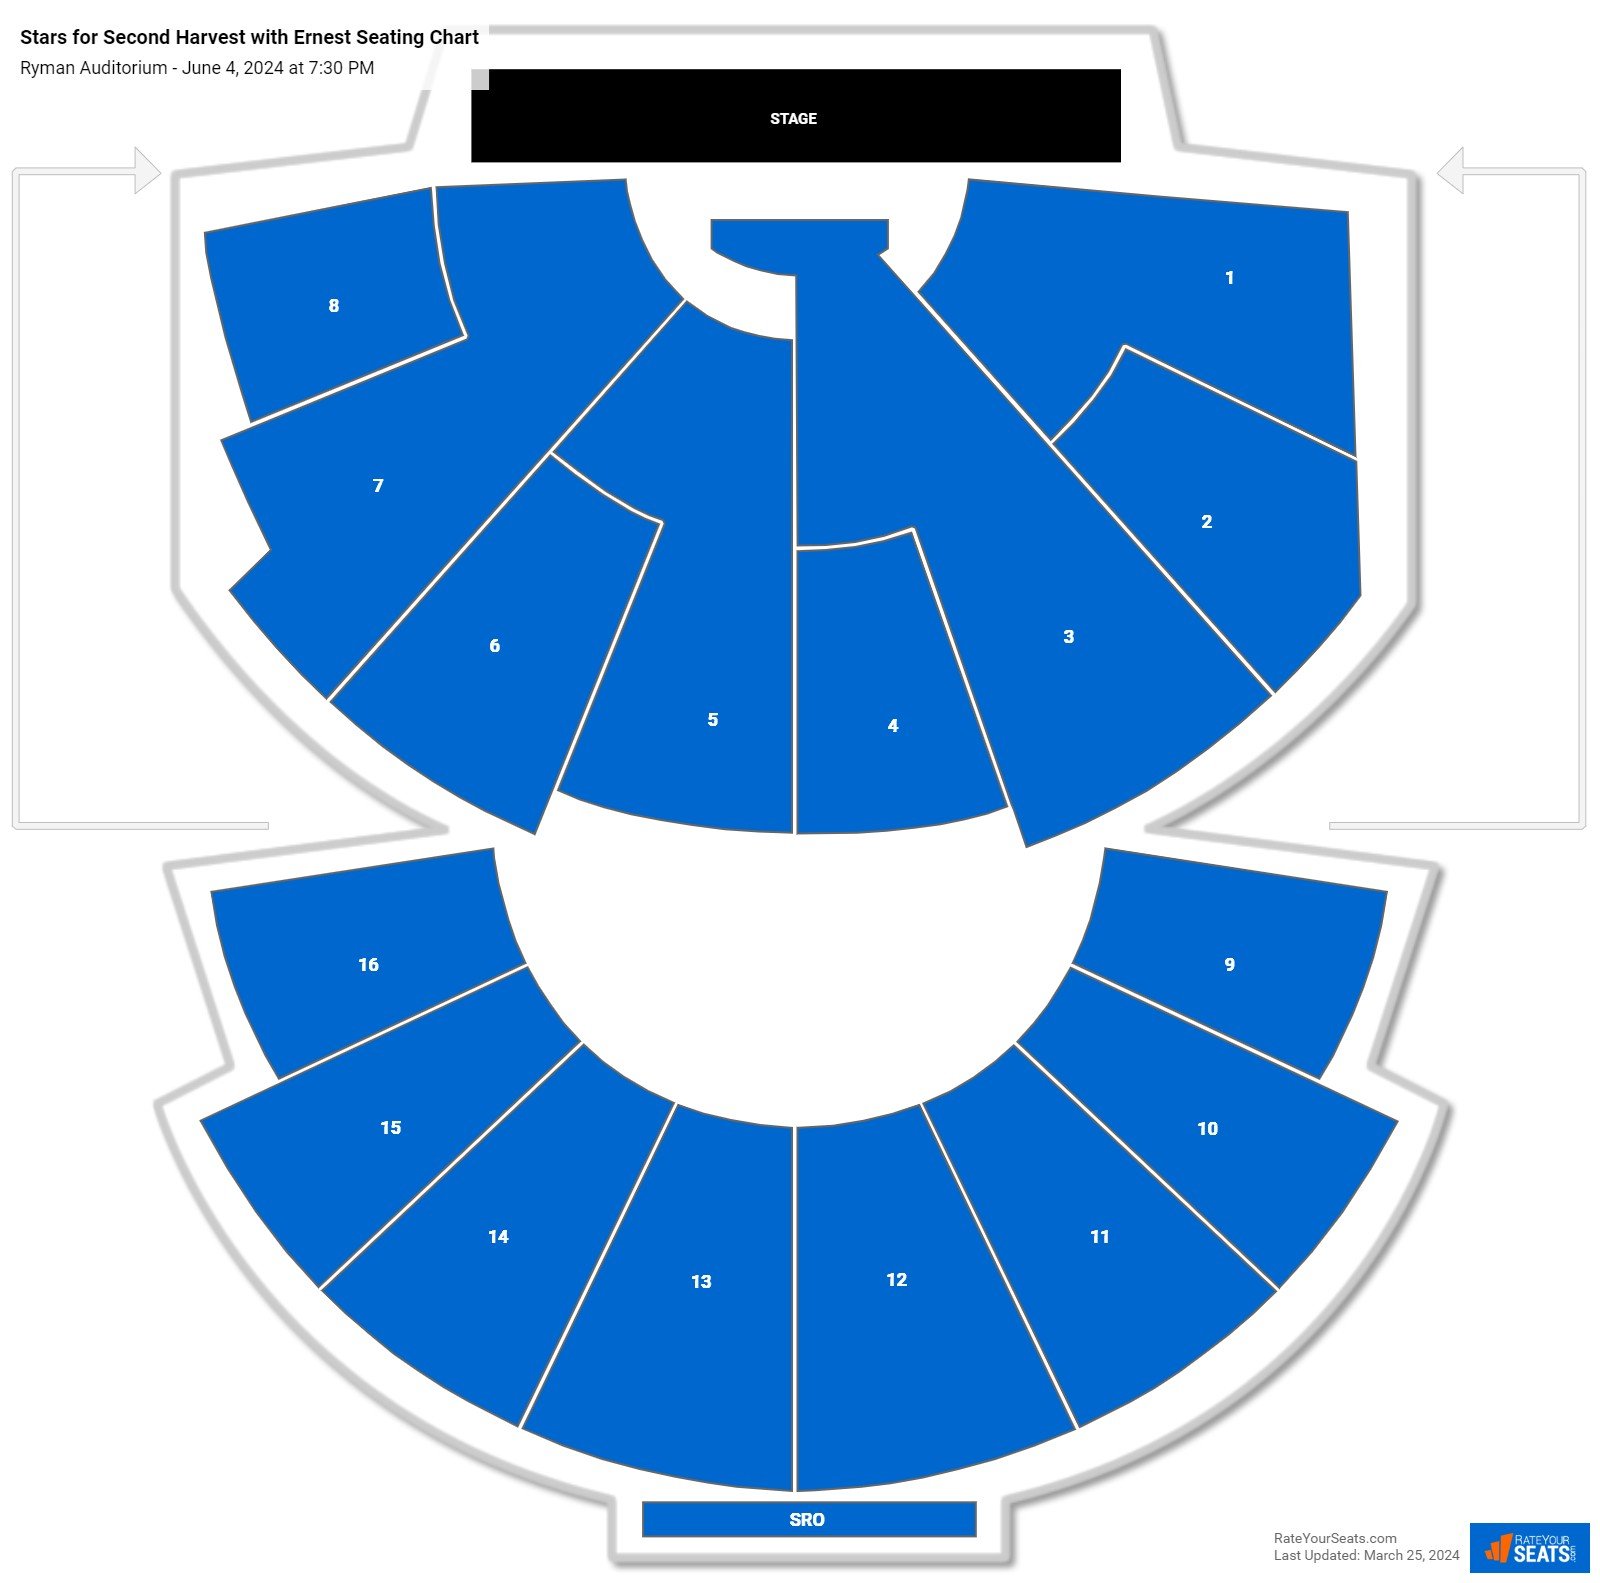 Stars for Second Harvest with Ernest seating chart Ryman Auditorium